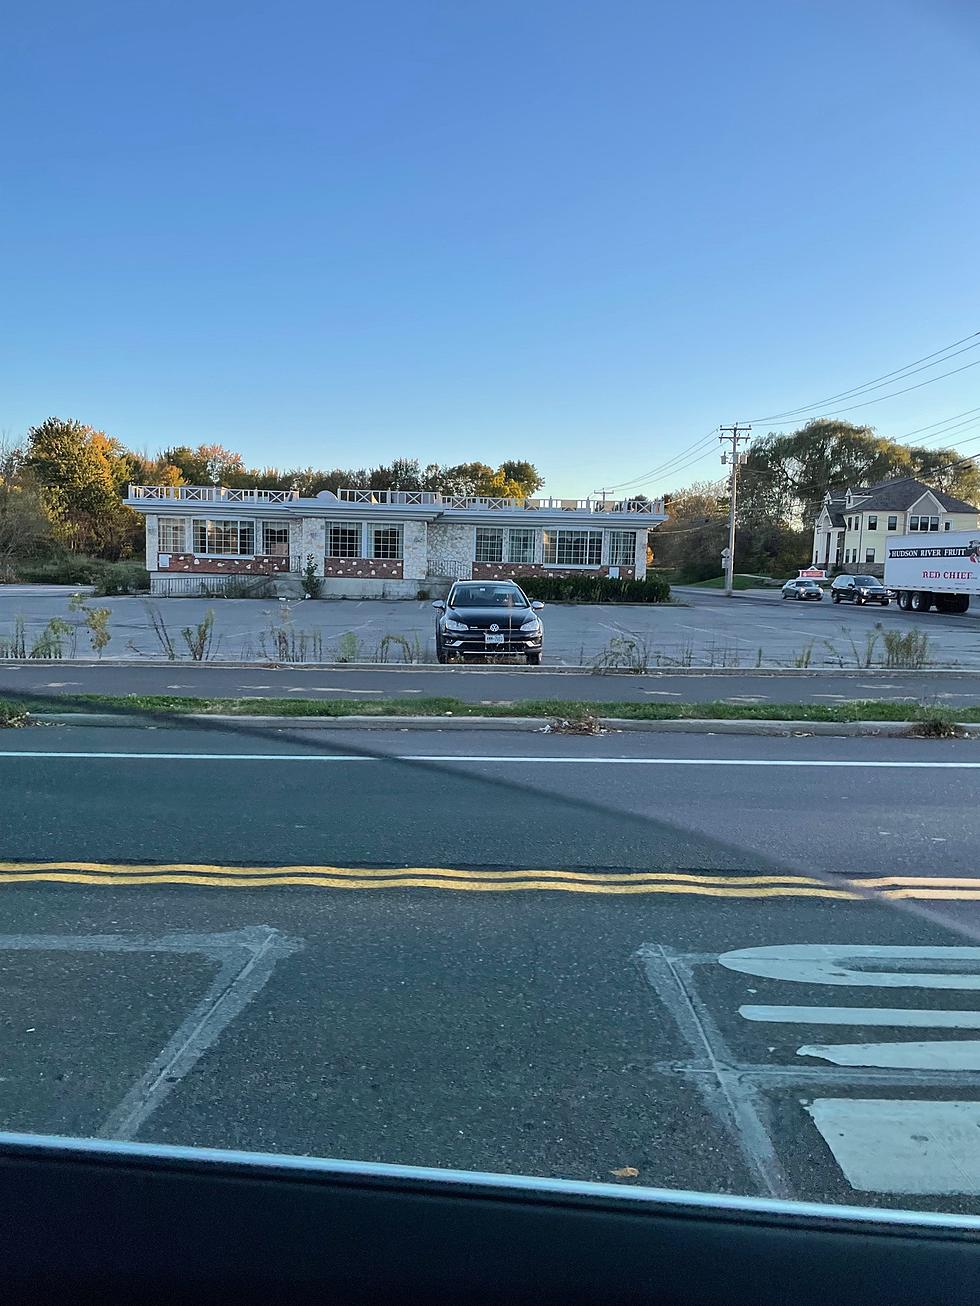 A Once Popular New Paltz Diner Set to Become a Credit Union